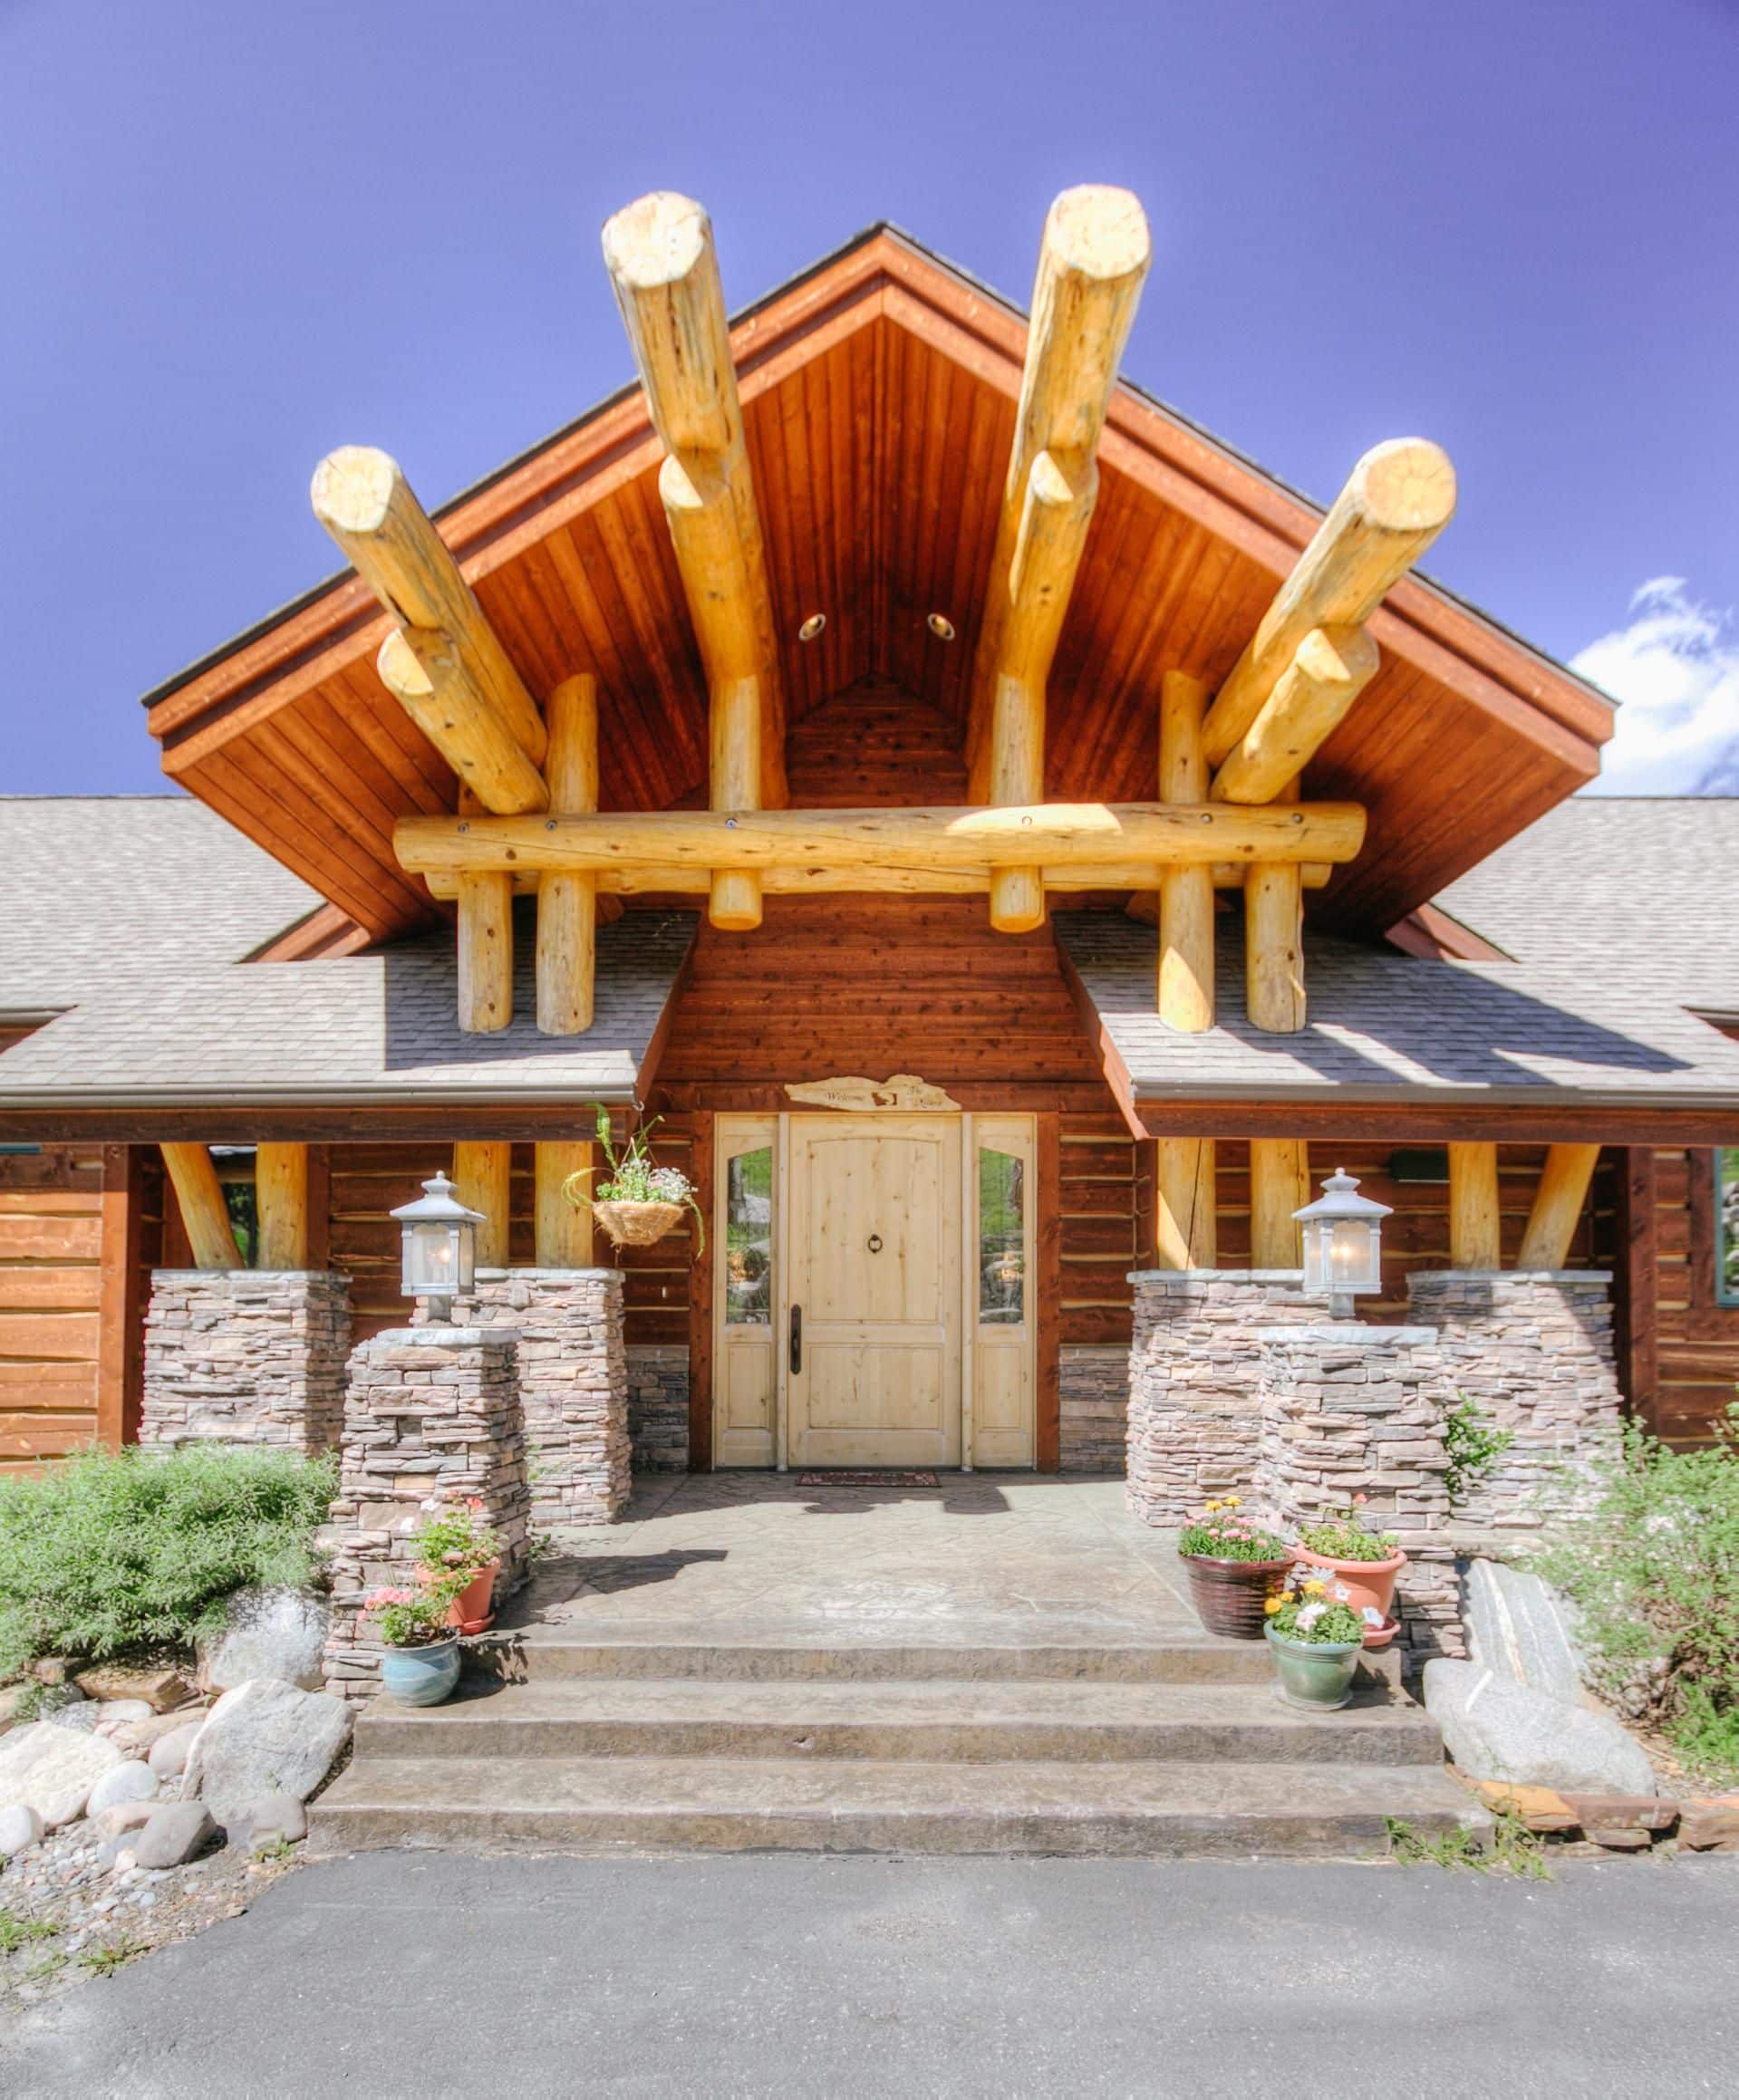 Luxurious Vacation Rental Homes in Big Sky, Montana